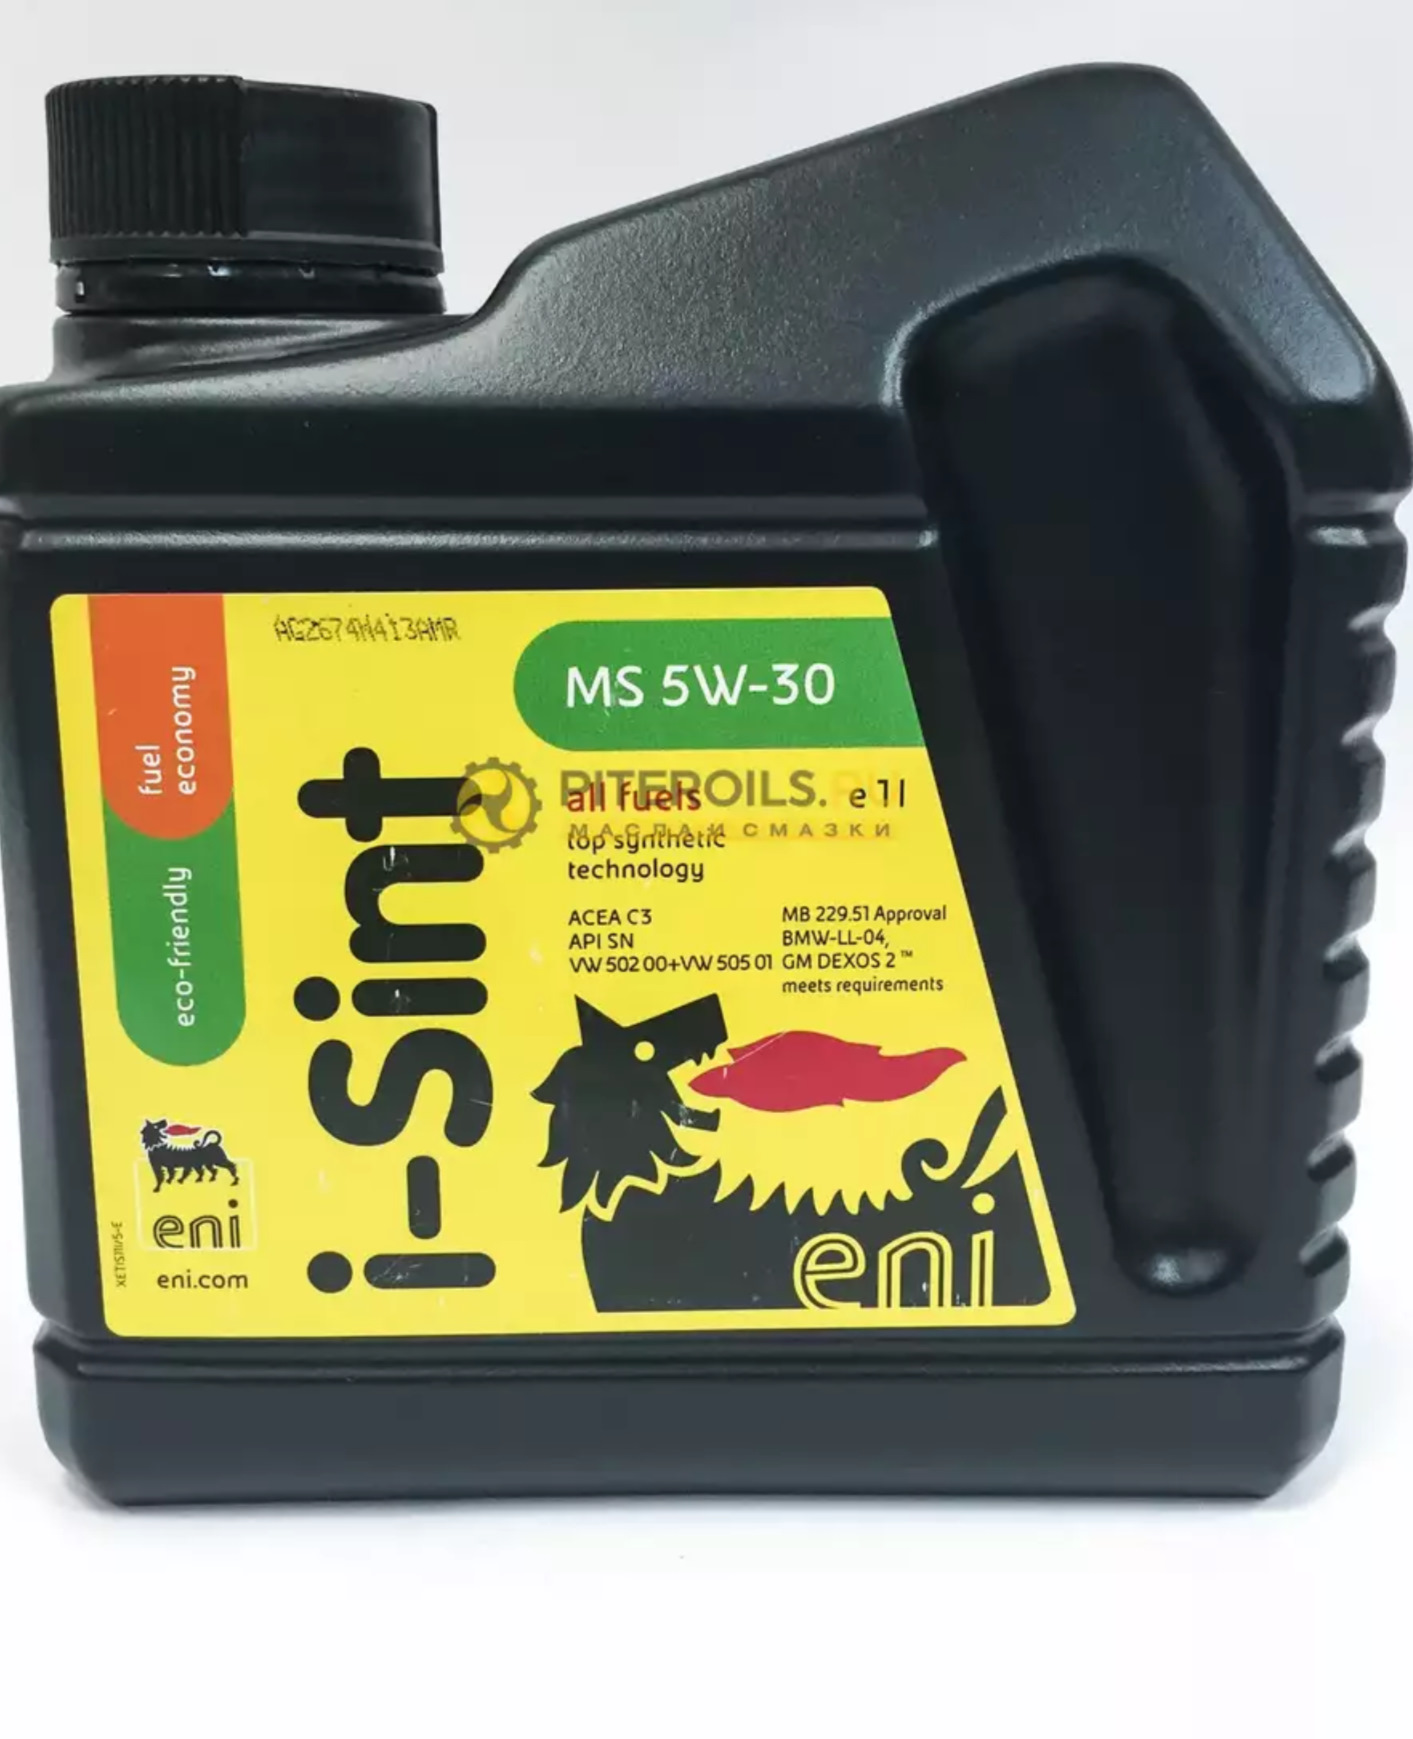 Масло eni 5w30. Моторное масло Eni 5w-30. Eni i-Sint MS 5w30 (1л)102181. Eni i-Sint Mid SAPS 5w-30 Top. Eni i-Sint MS 5w30 4л.